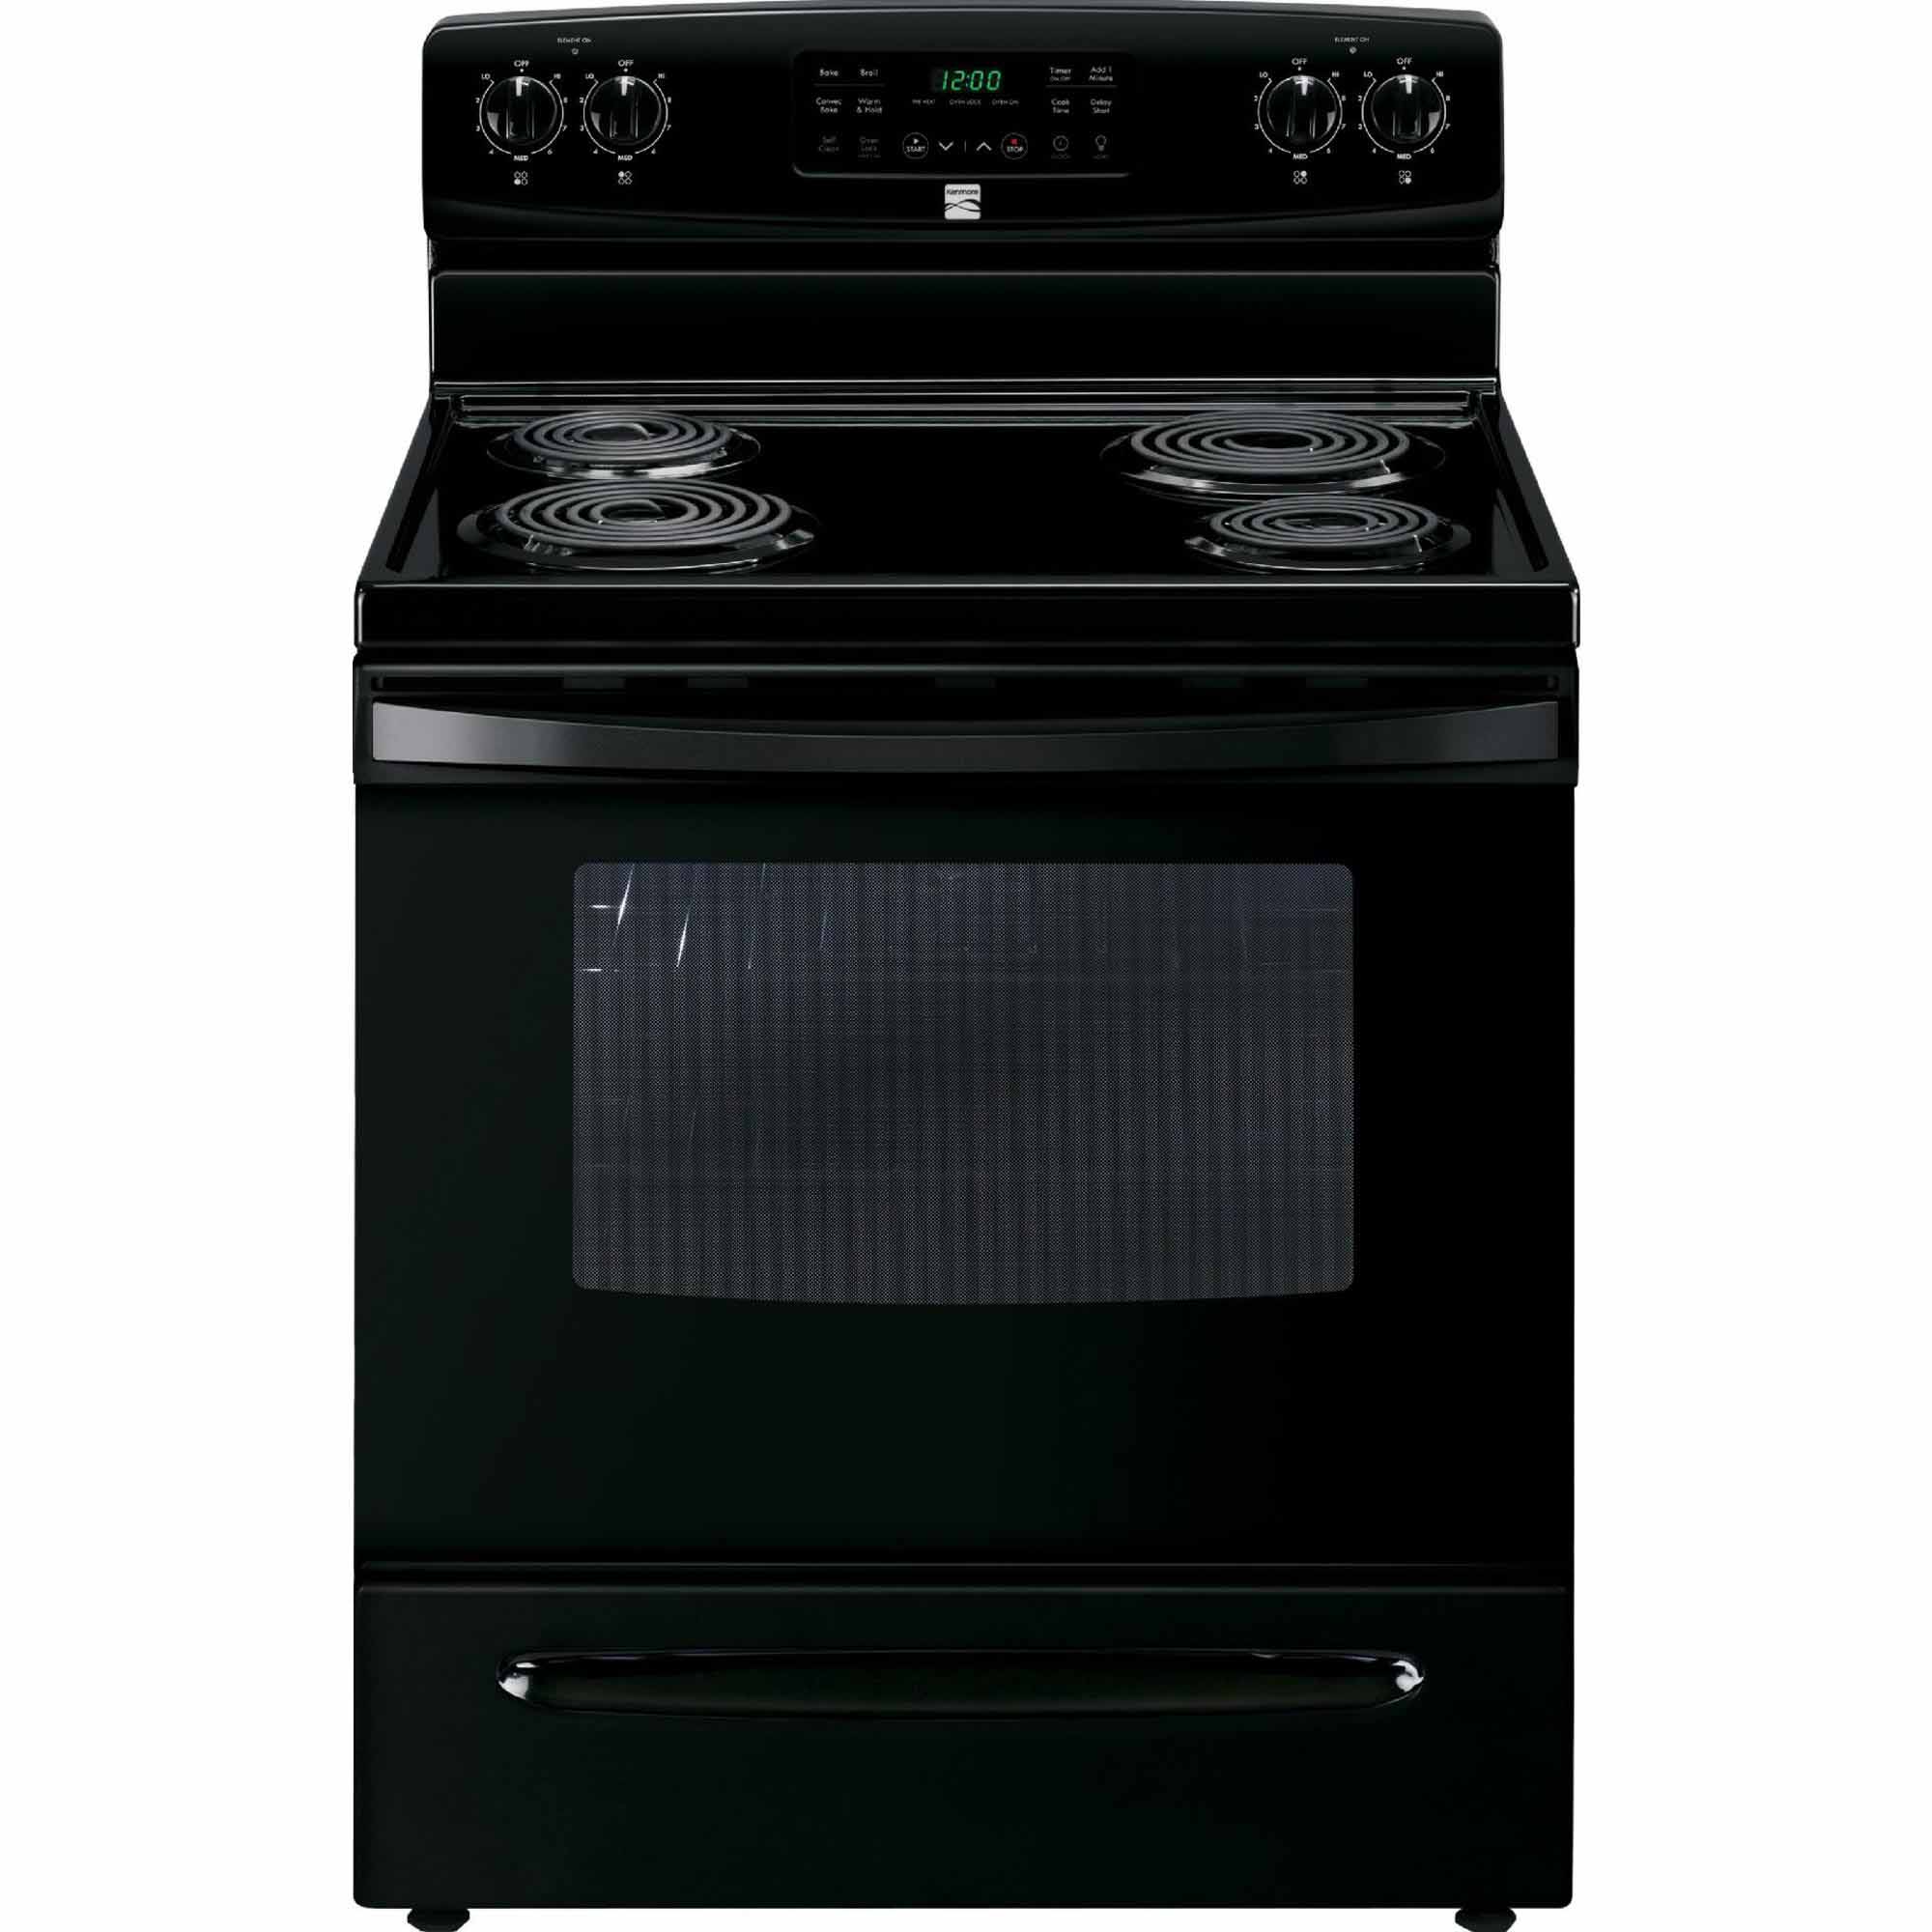 0012505508103 - 94159 5.4 CU. FT. SELF-CLEANING ELECTRIC RANGE W / CONVECTION OVEN - BLACK